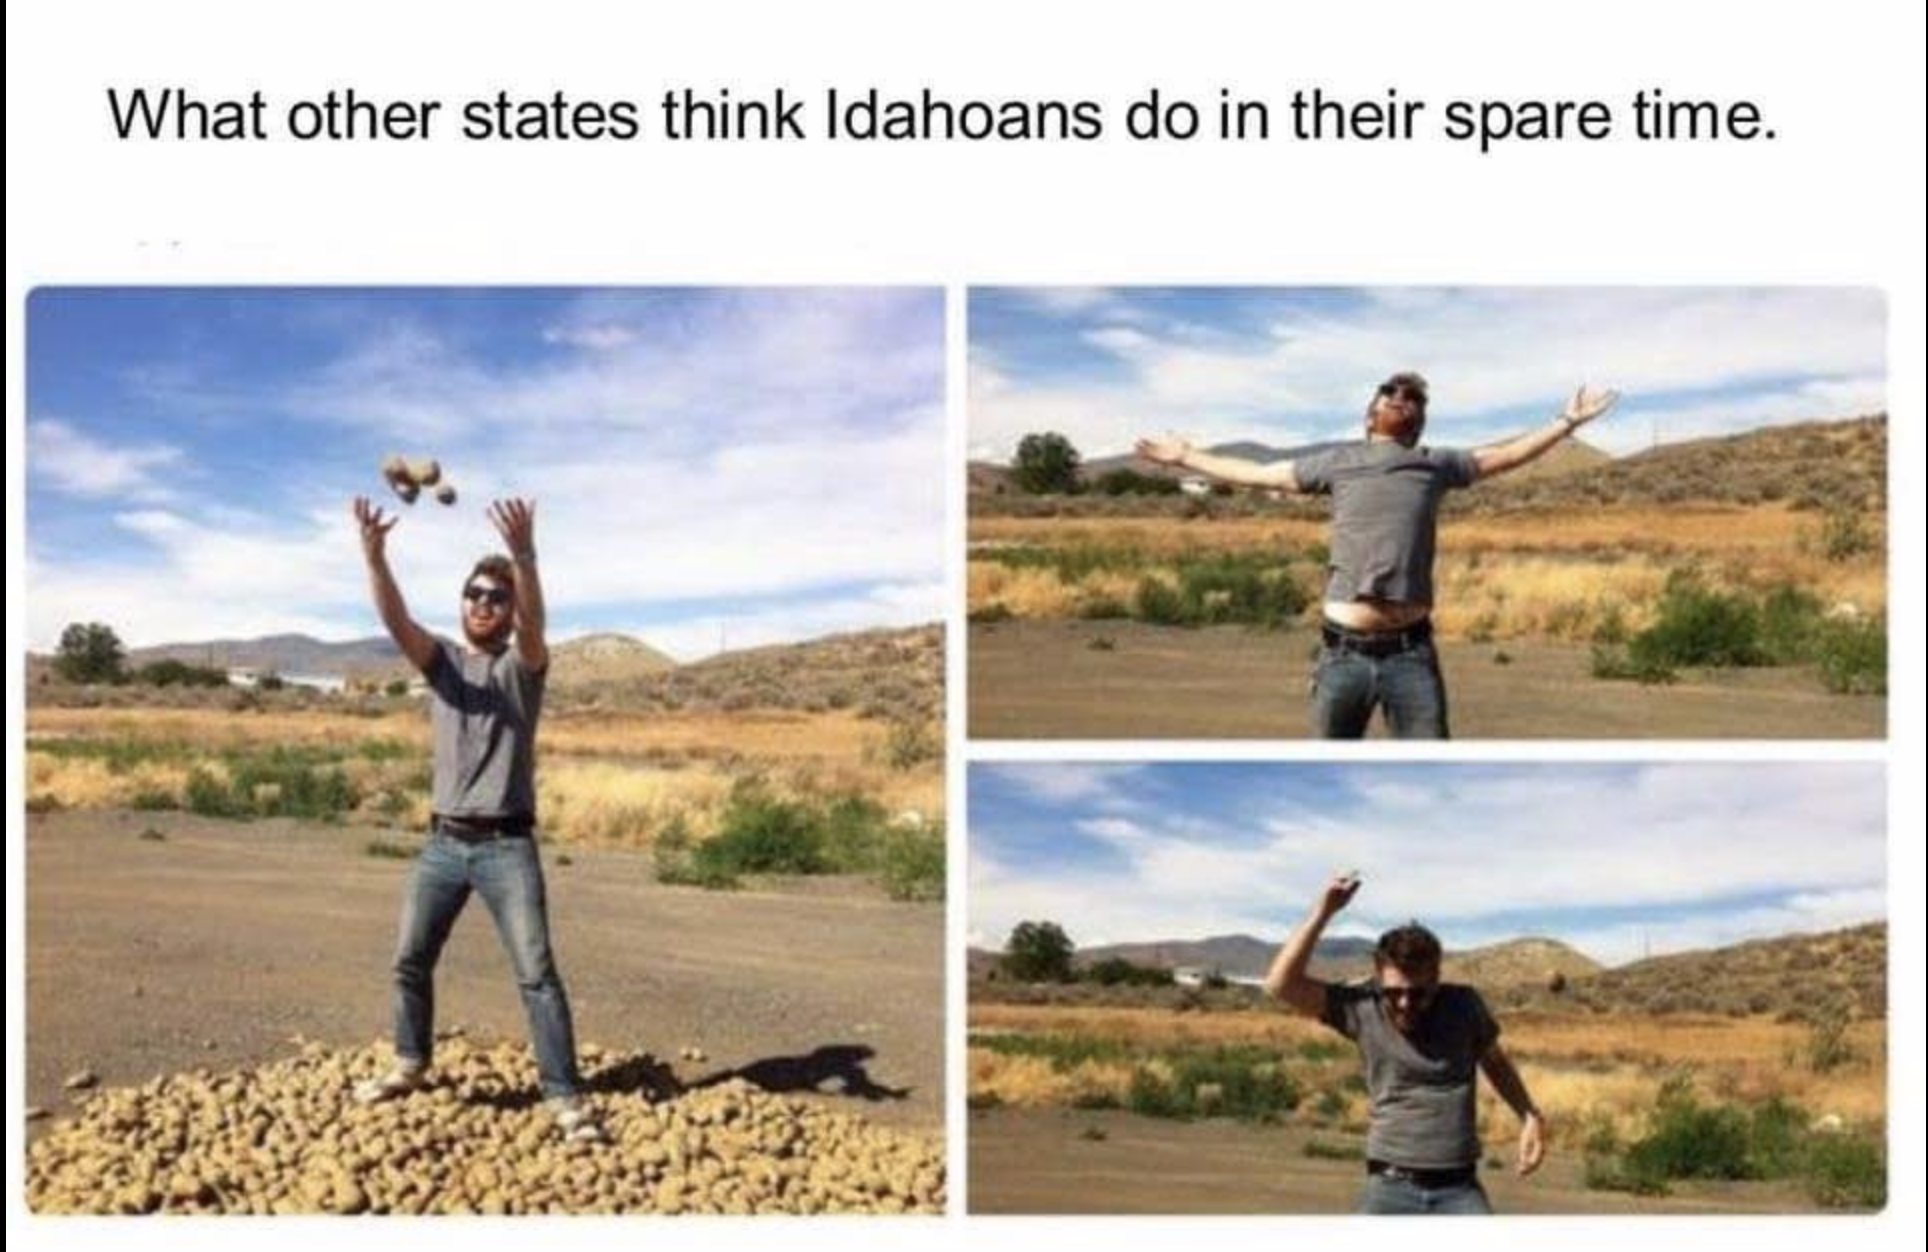 travel - What other states think Idahoans do in their spare time.